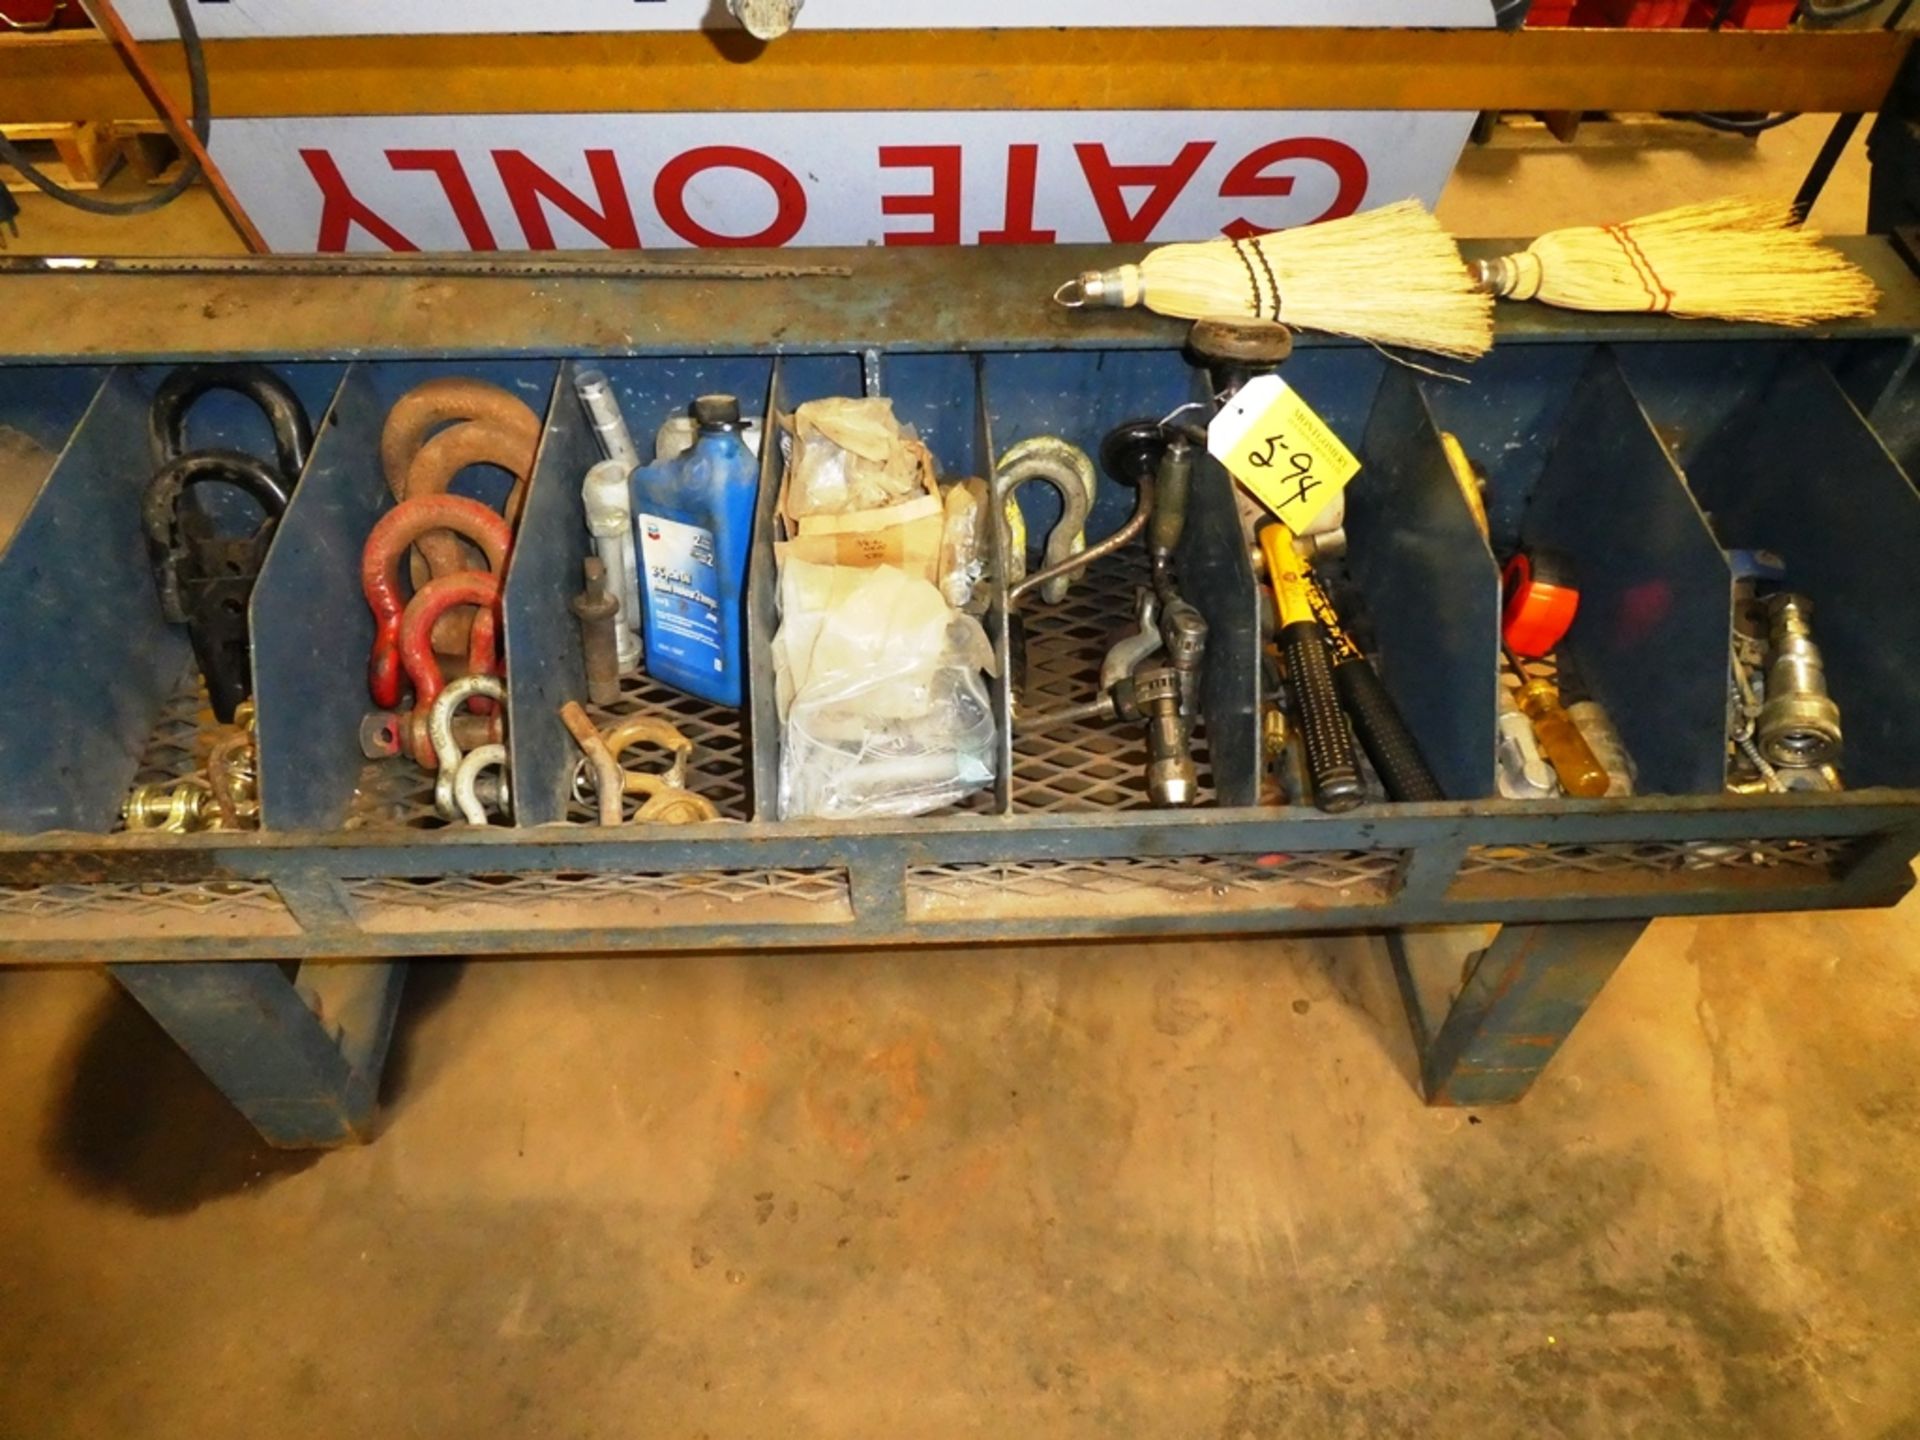 L/O SHACKLES, HAMMER, MISC. TOOLS IN TOOL RACK